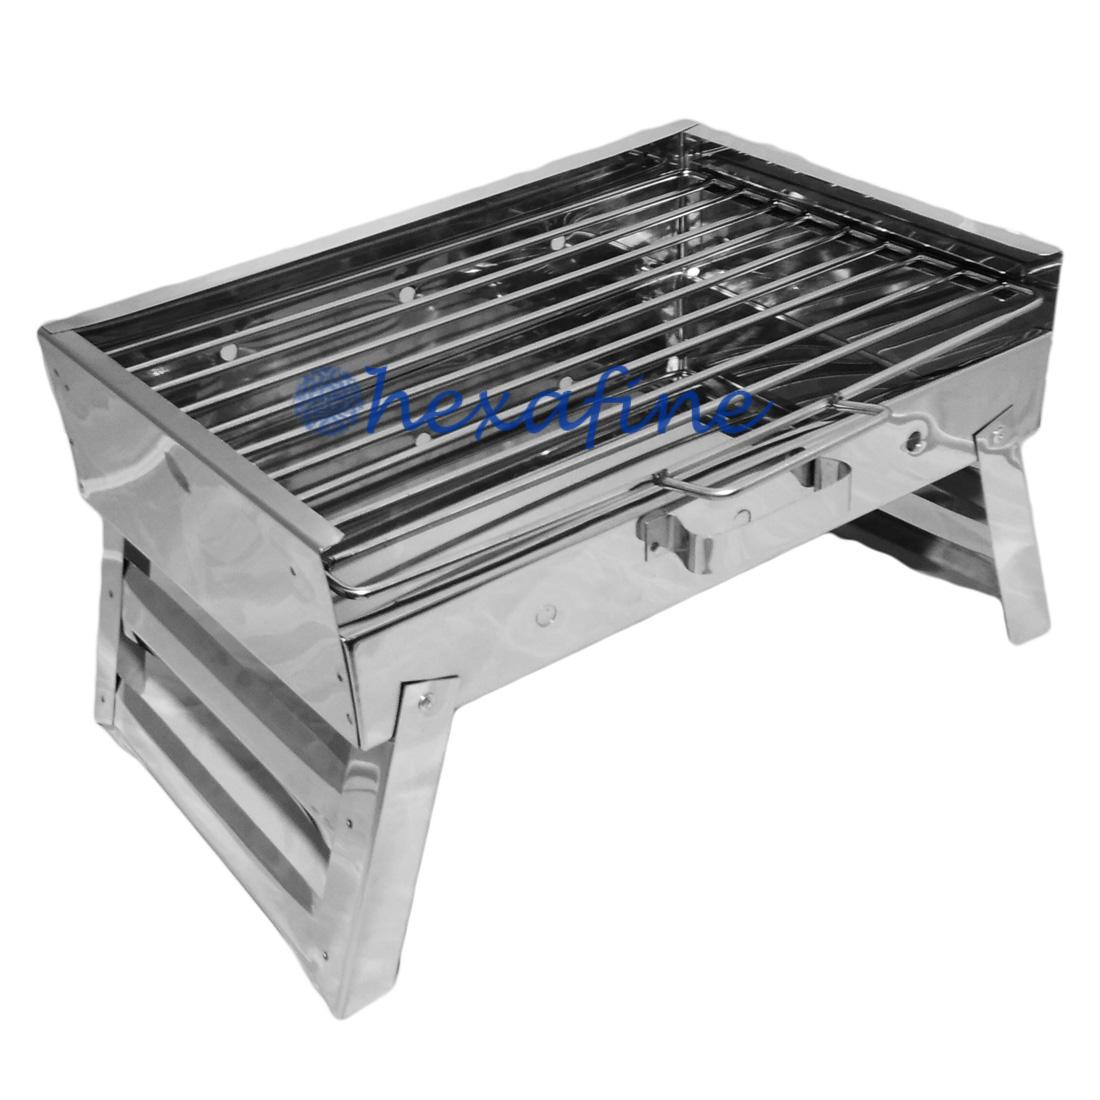 BBQ Grills For Sale Barbecue Grill Prices Brands Review In